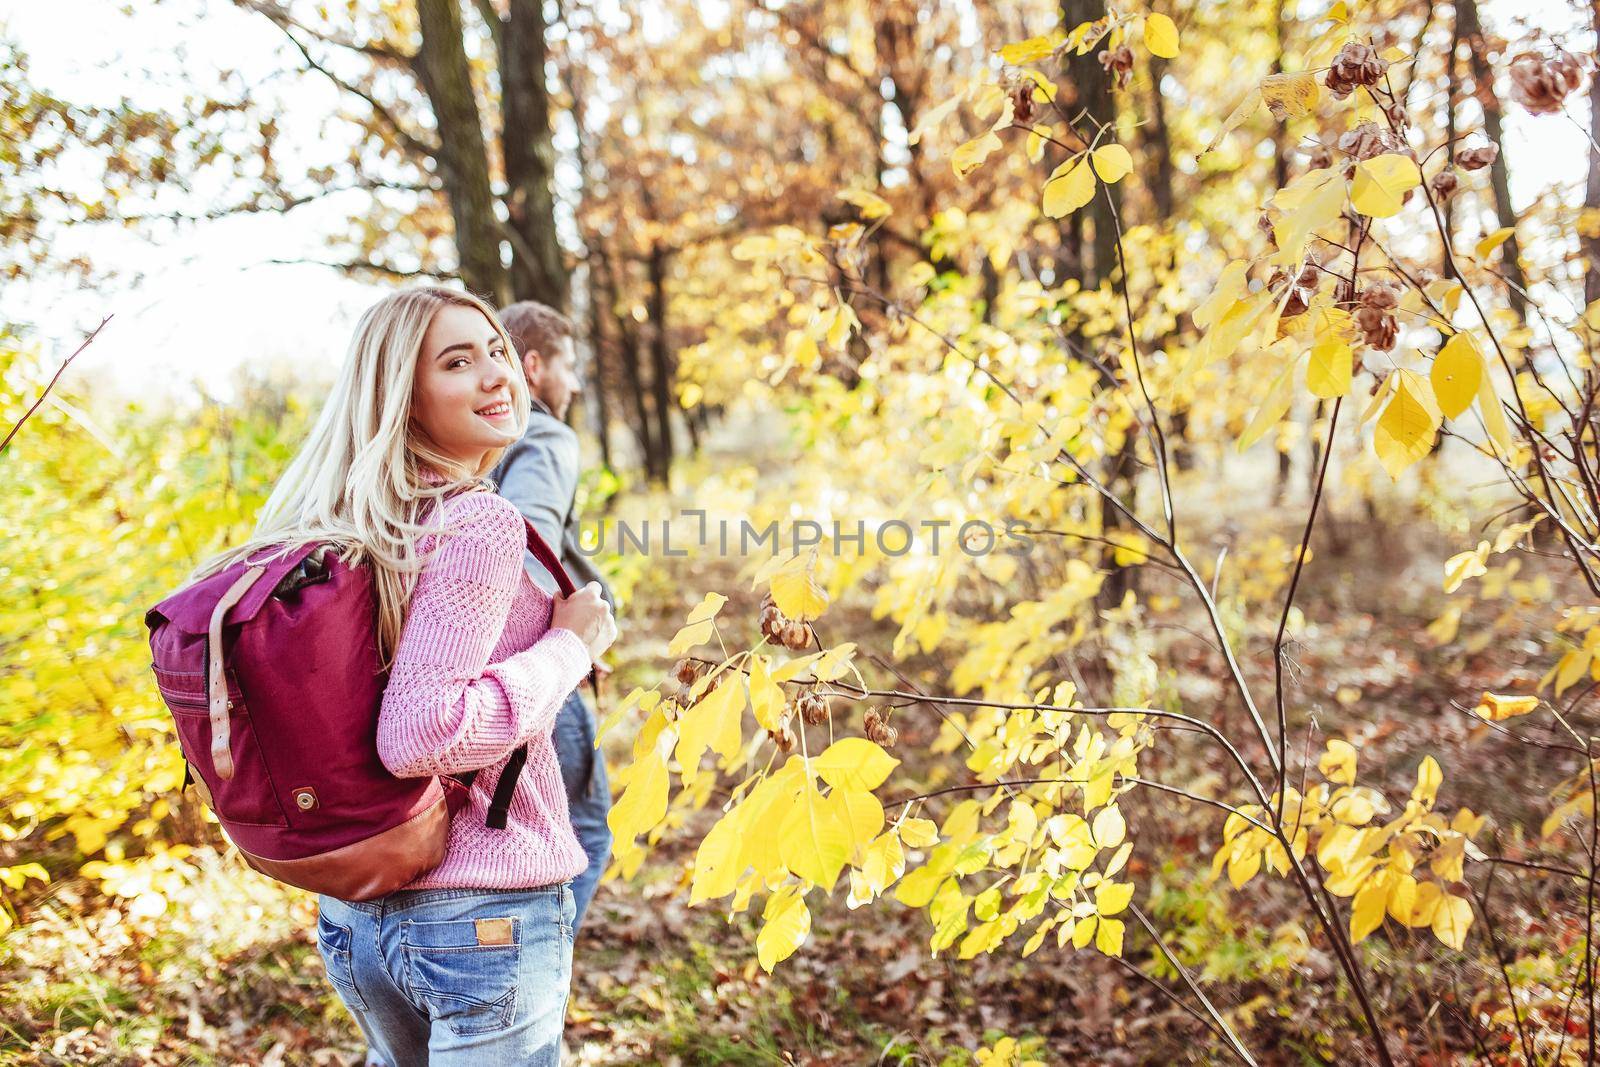 Happy travelers go to the autumn forest holding hands to meet new adventures. Focus on the charming blonde in the foreground who turned around looking at the camera. Togetherness with nature concept by LipikStockMedia